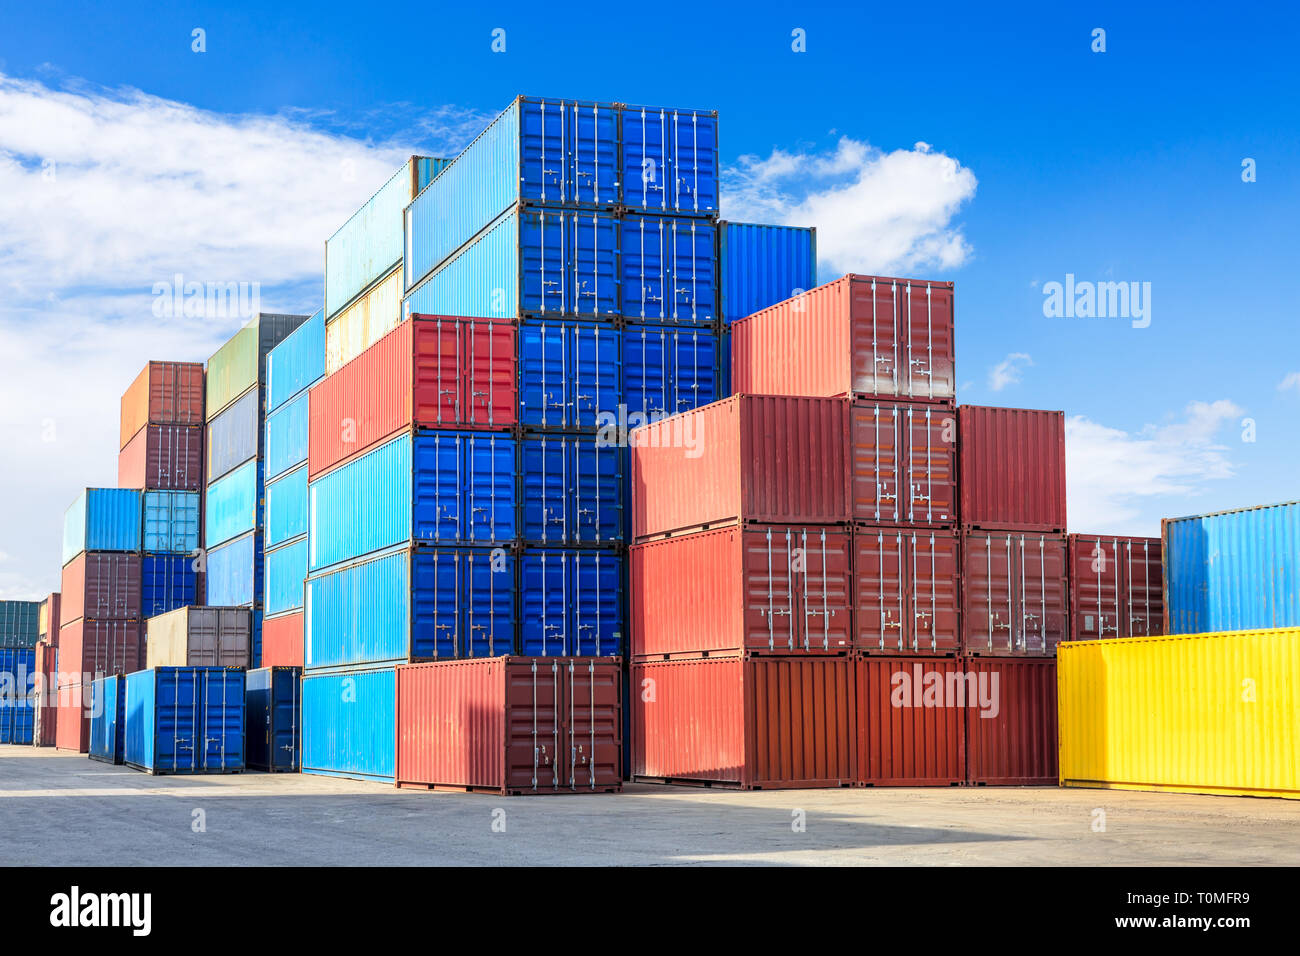 Industrial Container yard for Logistic Import Export business Stock Photo